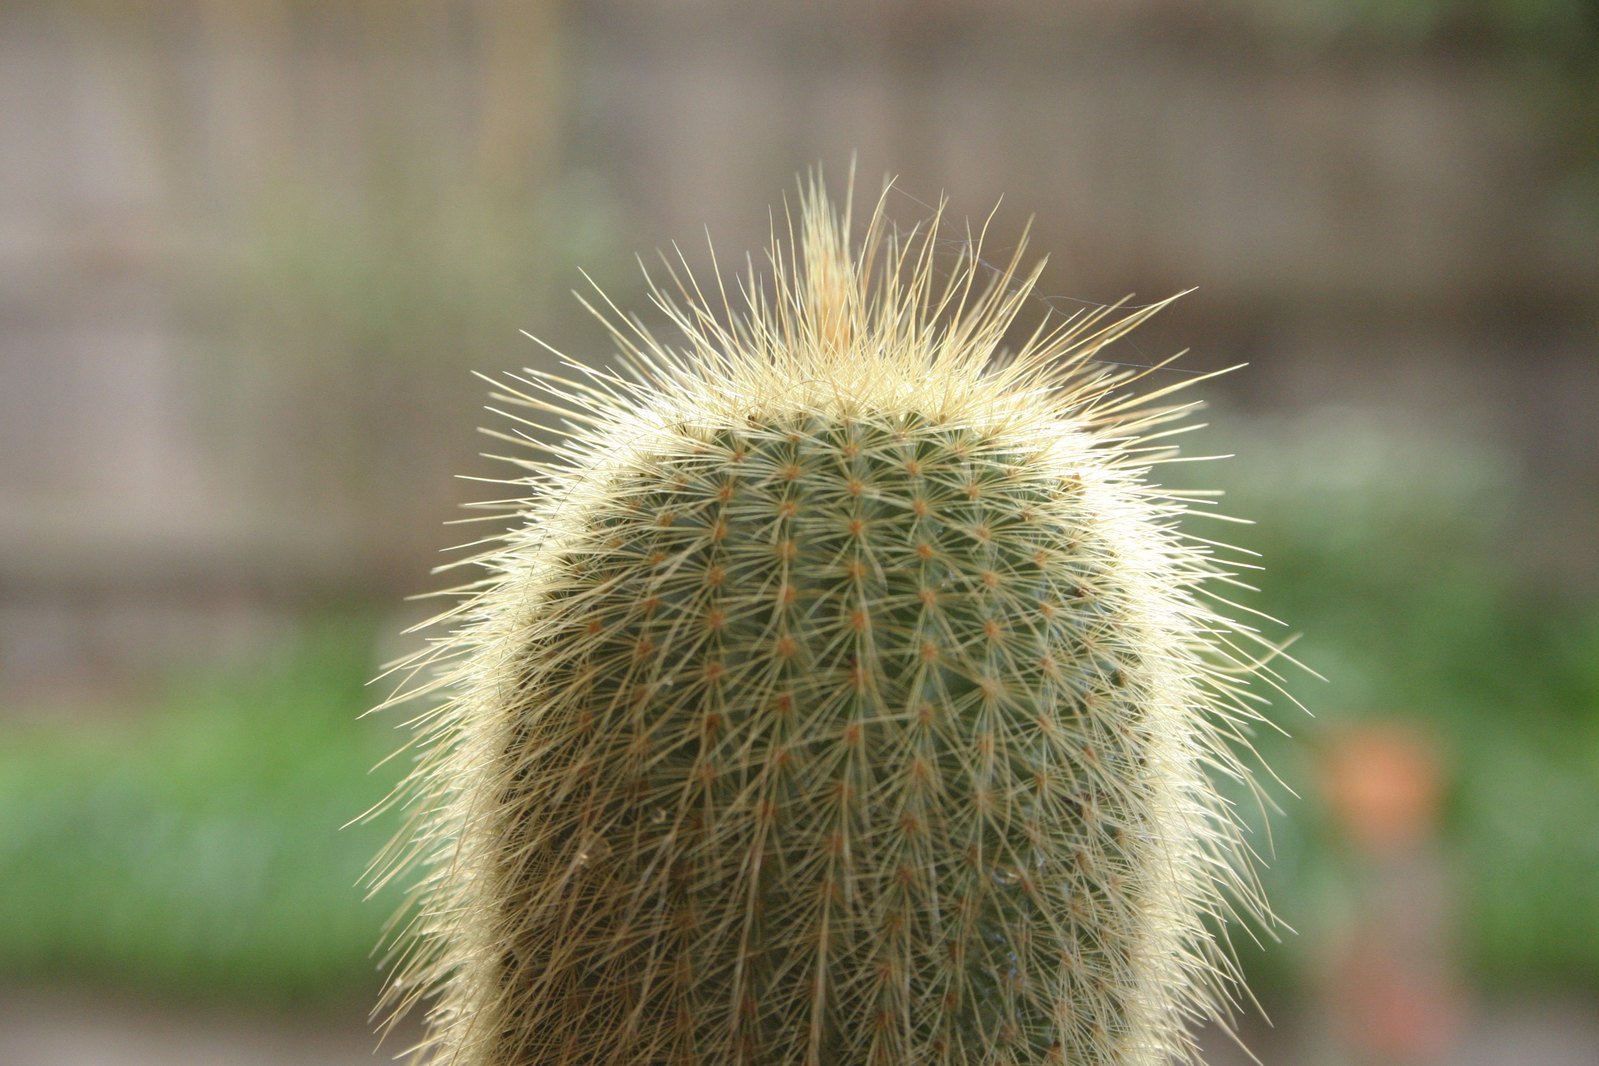 a cactus with long thick, sharp spikes